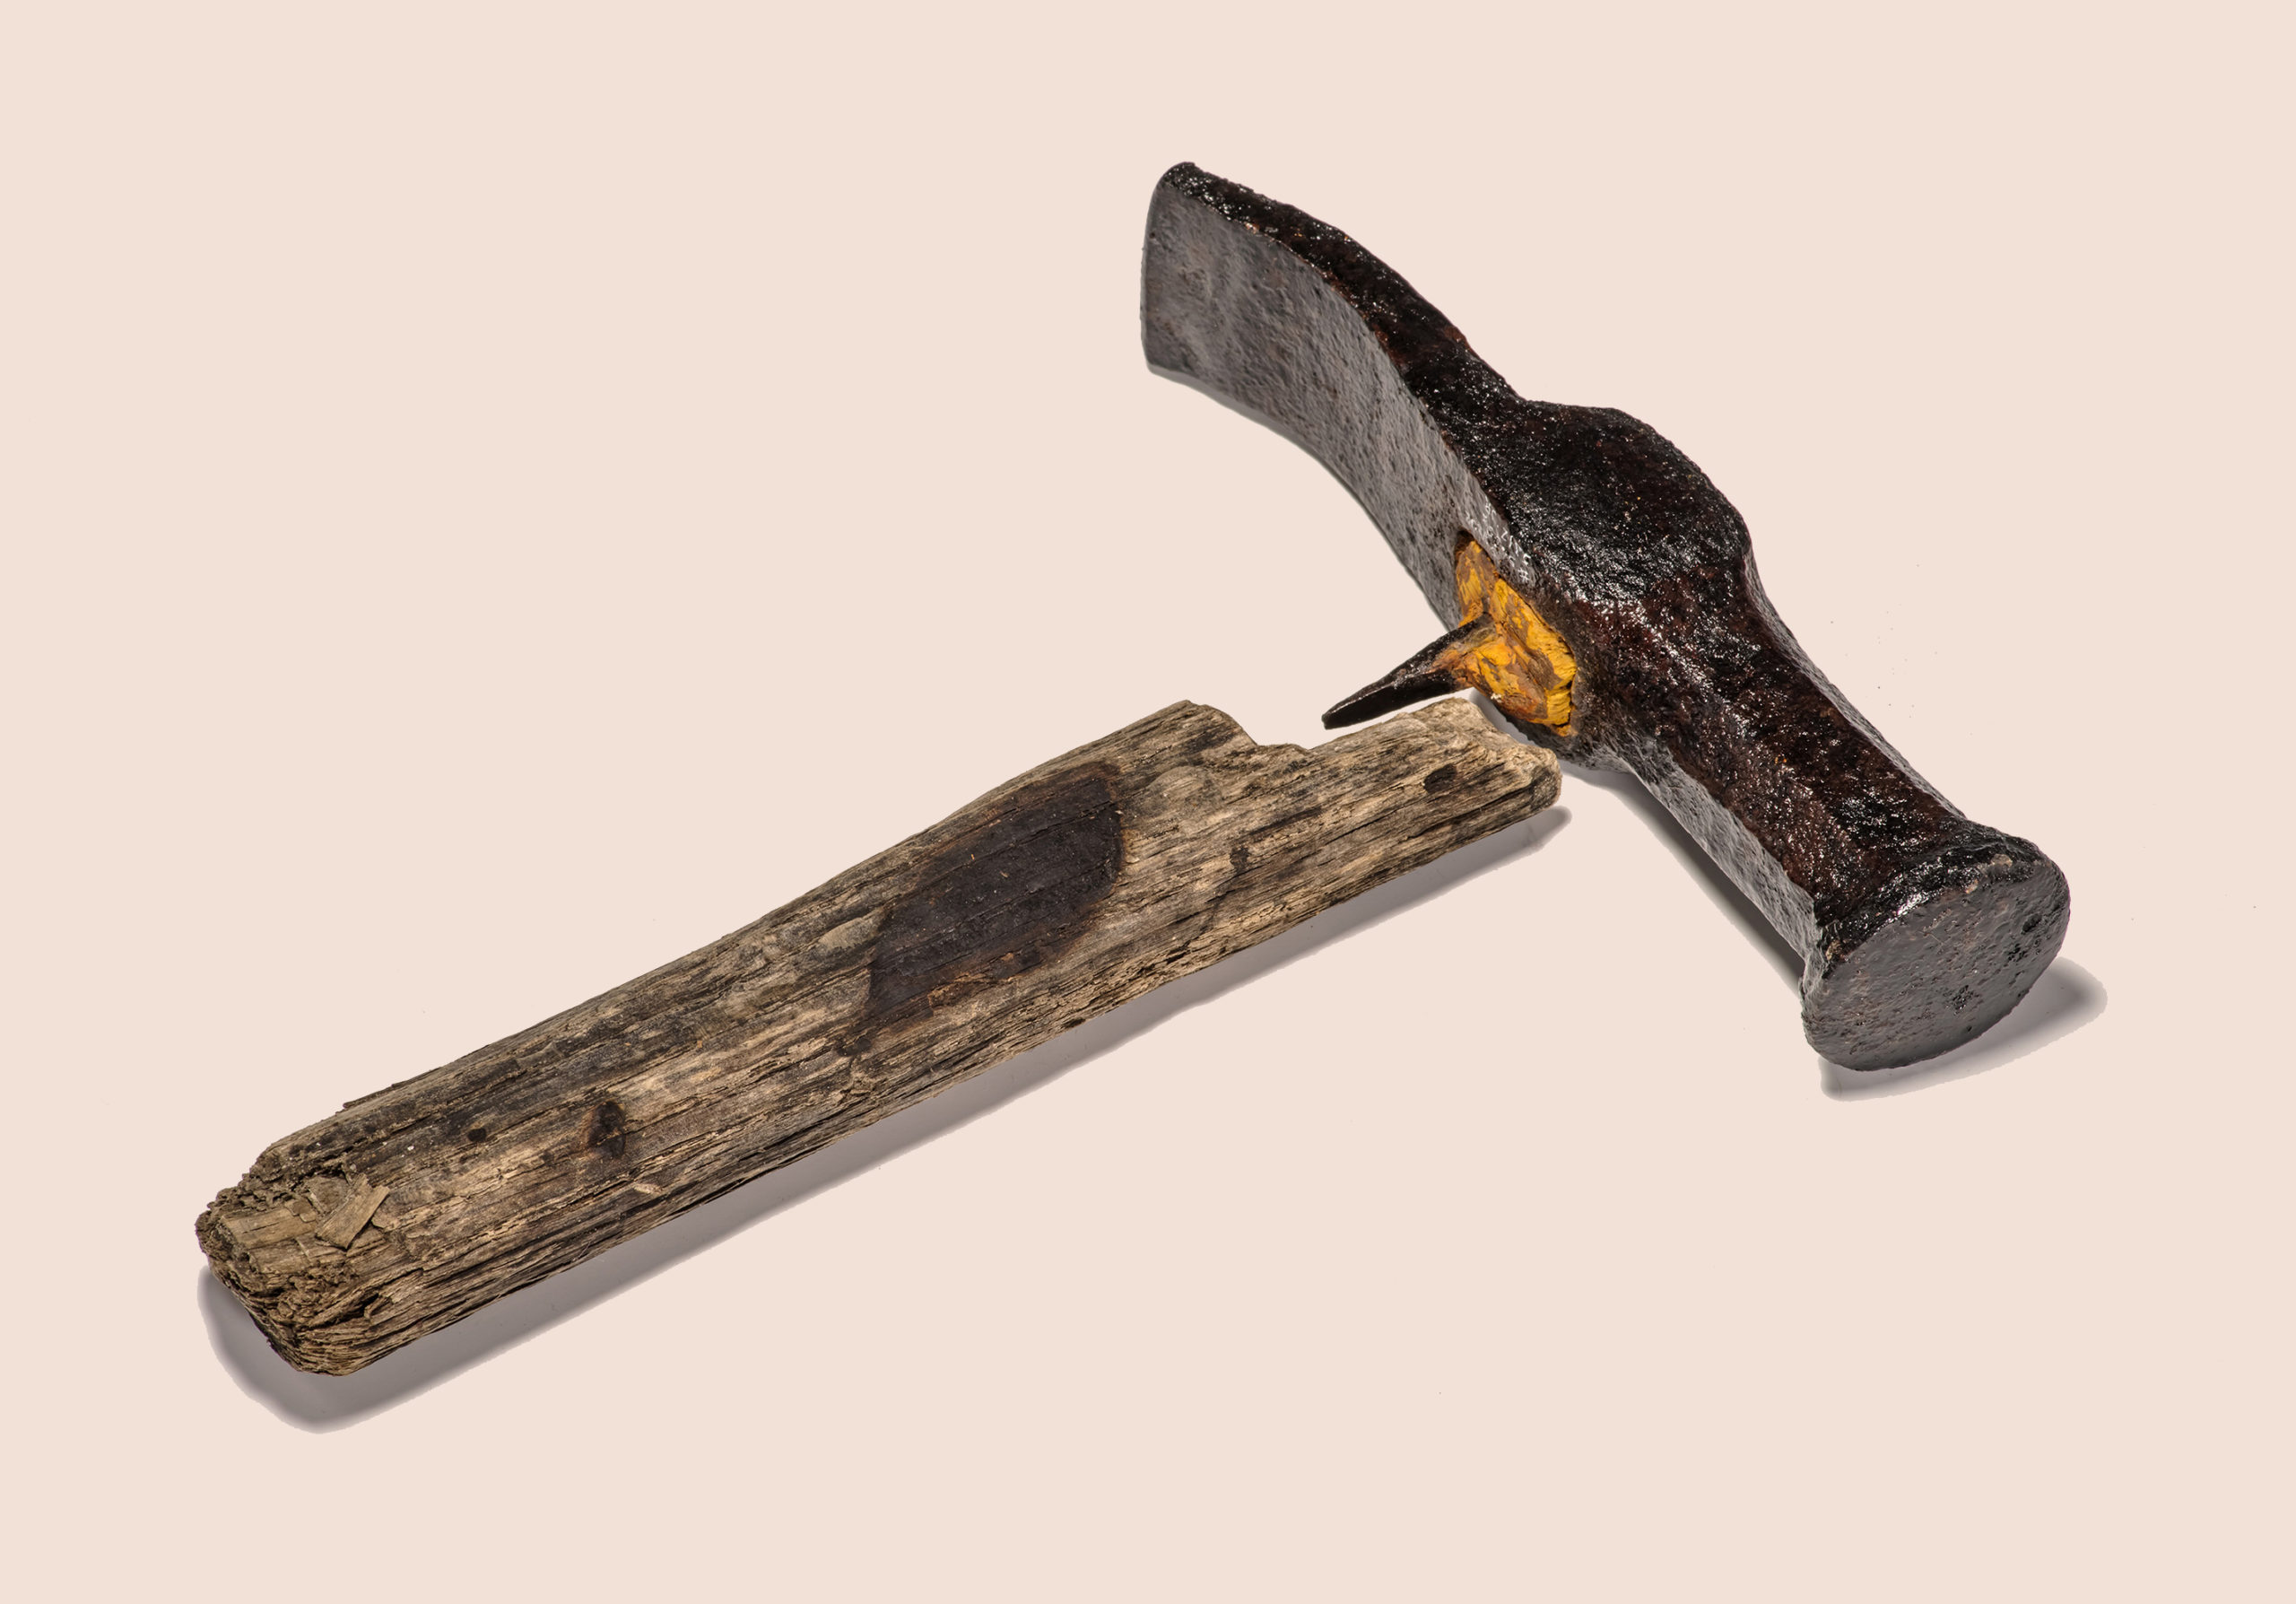 Hammer head and wooden handle